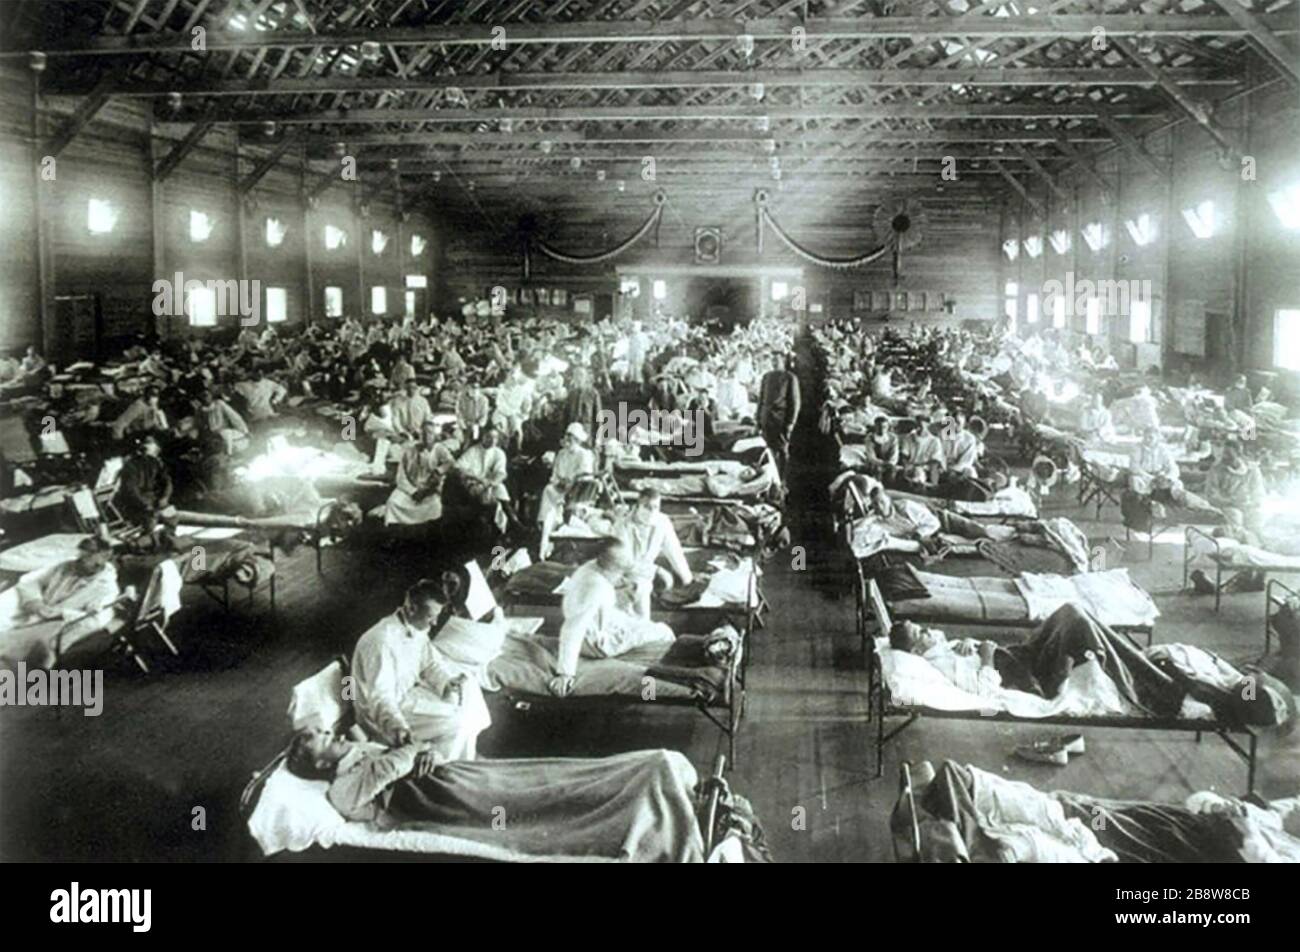 SPANISH FLU 1918 Soldiers from Fort Riley, Kansas, suffering from Spanish flu are hospitalised in a converted building at  Camp Funston where some of the first cases of the outbreak were recorded. Stock Photo